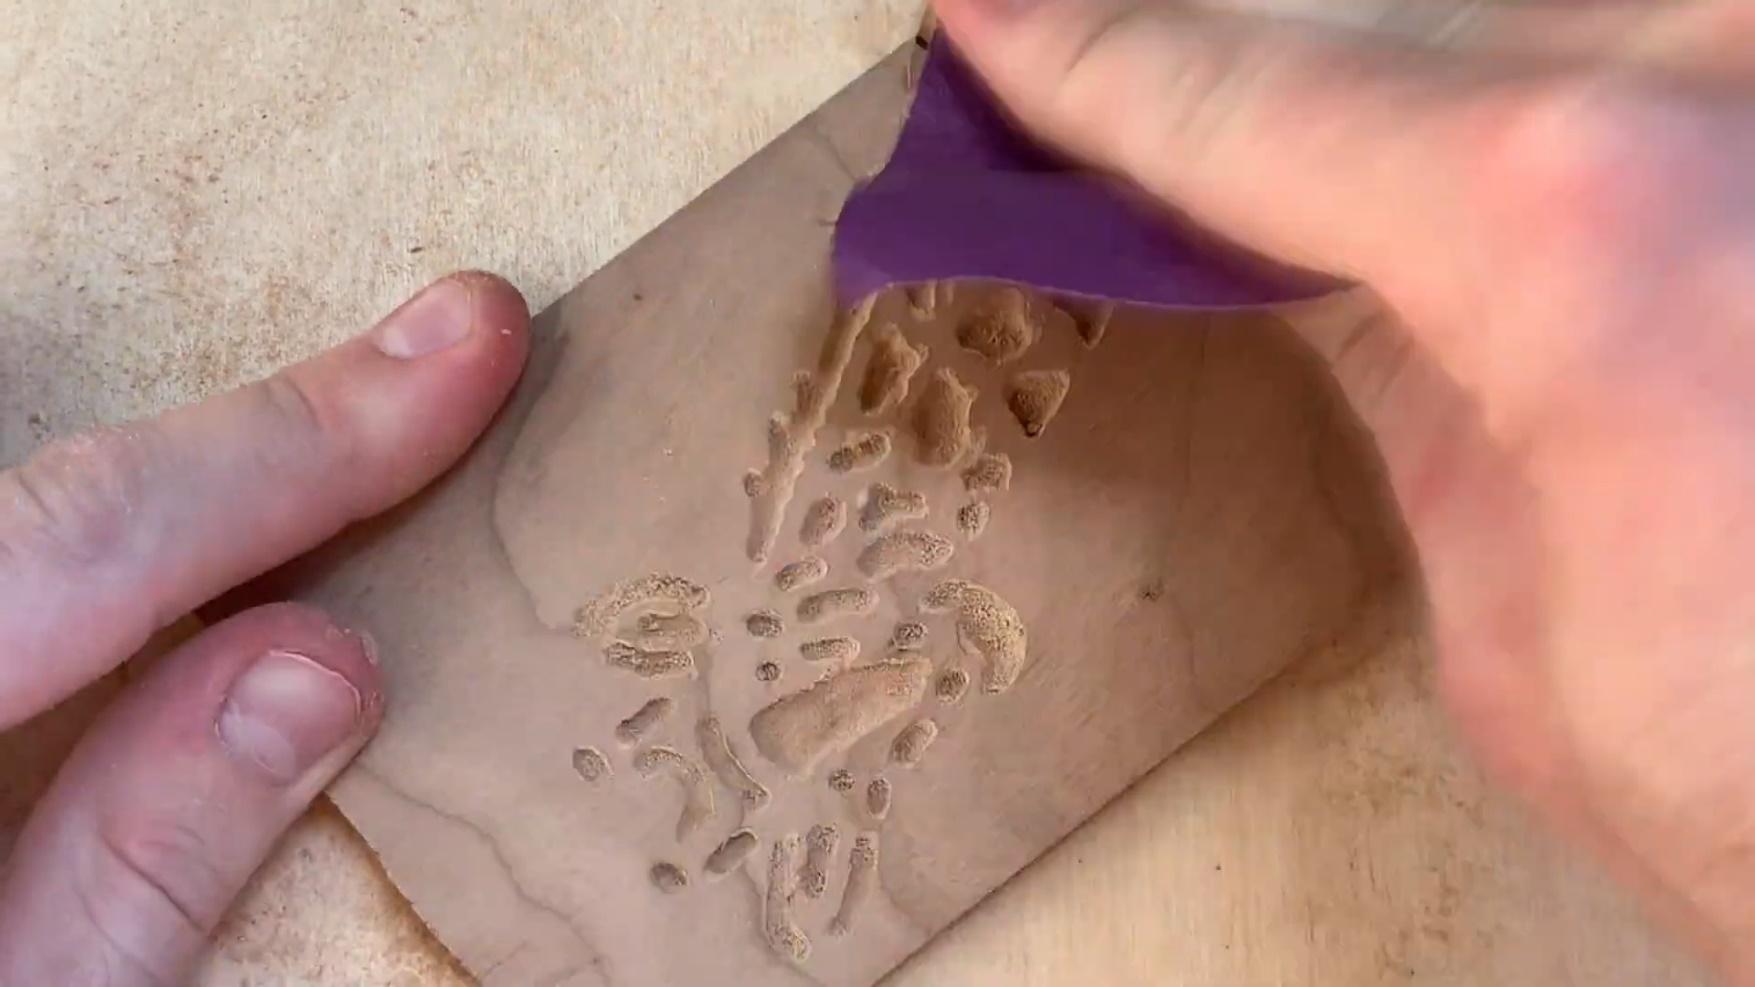 2024] How to Engrave Wood: Top 7 Methods Explained